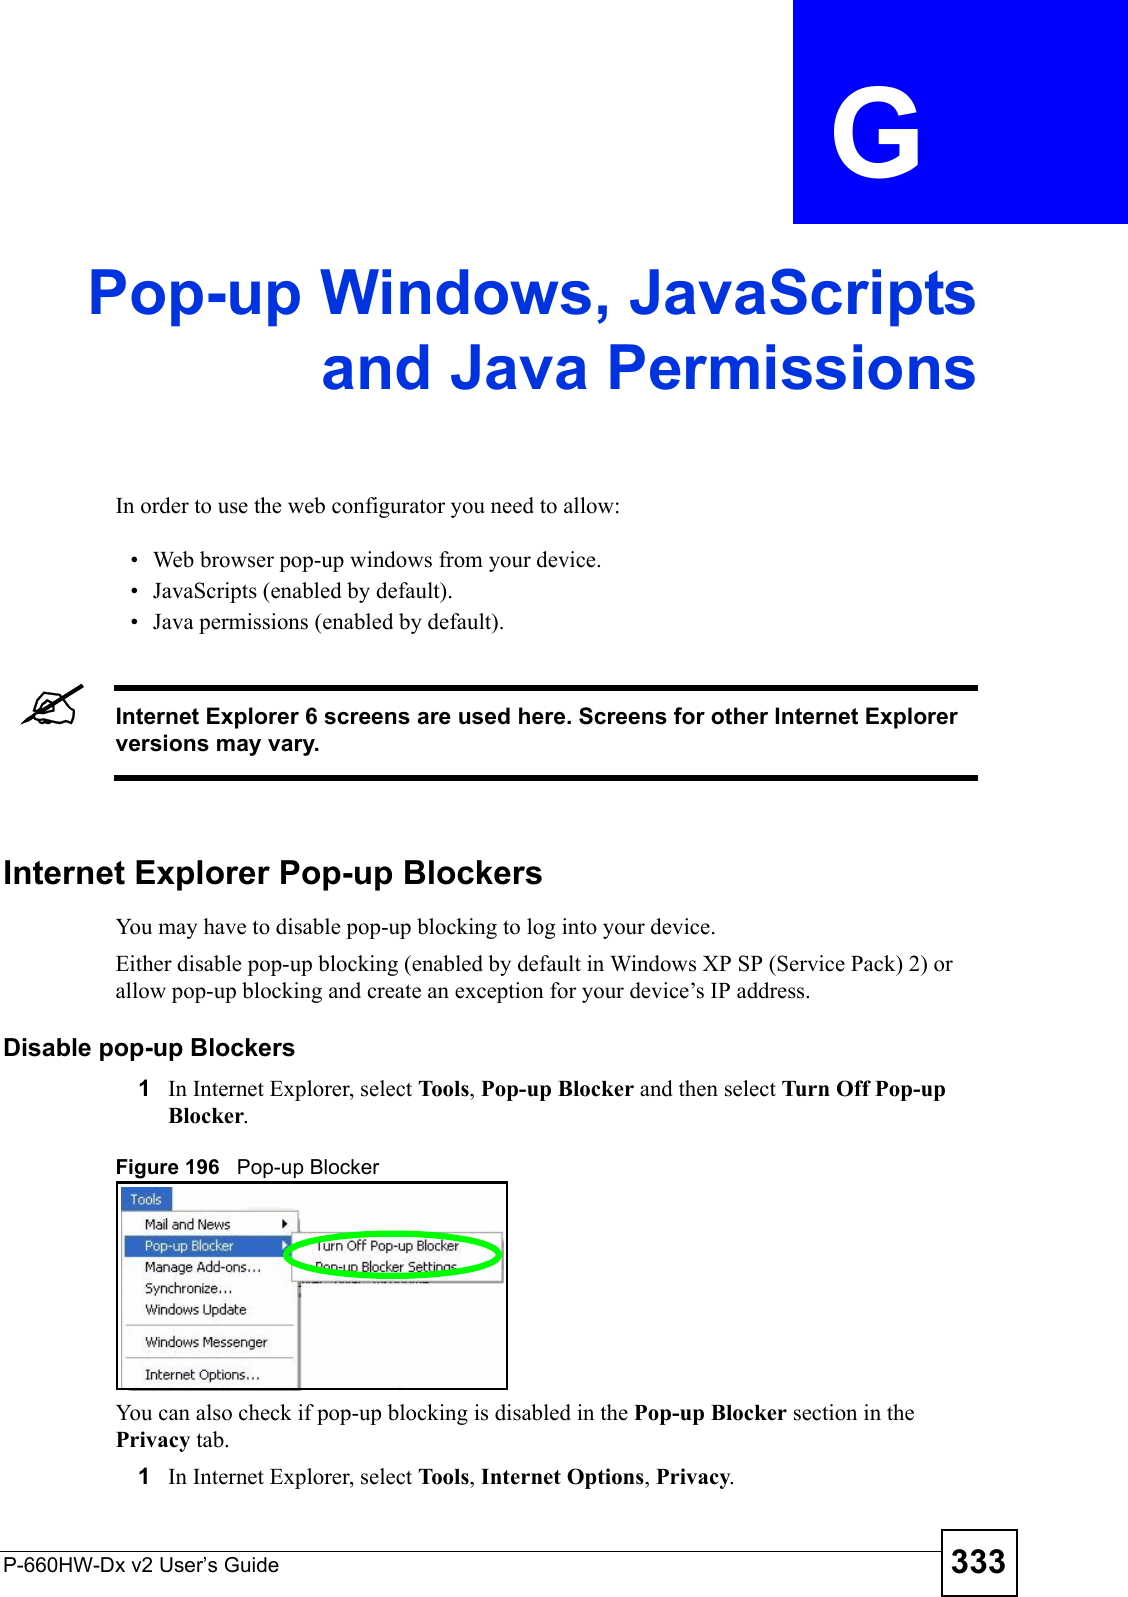 P-660HW-Dx v2 User’s Guide 333APPENDIX  G Pop-up Windows, JavaScriptsand Java PermissionsIn order to use the web configurator you need to allow:• Web browser pop-up windows from your device.• JavaScripts (enabled by default).• Java permissions (enabled by default).&quot;Internet Explorer 6 screens are used here. Screens for other Internet Explorer versions may vary.Internet Explorer Pop-up BlockersYou may have to disable pop-up blocking to log into your device. Either disable pop-up blocking (enabled by default in Windows XP SP (Service Pack) 2) or allow pop-up blocking and create an exception for your device’s IP address.Disable pop-up Blockers1In Internet Explorer, select Tools, Pop-up Blocker and then select Turn Off Pop-up Blocker. Figure 196   Pop-up BlockerYou can also check if pop-up blocking is disabled in the Pop-up Blocker section in the Privacy tab. 1In Internet Explorer, select Tools, Internet Options, Privacy.